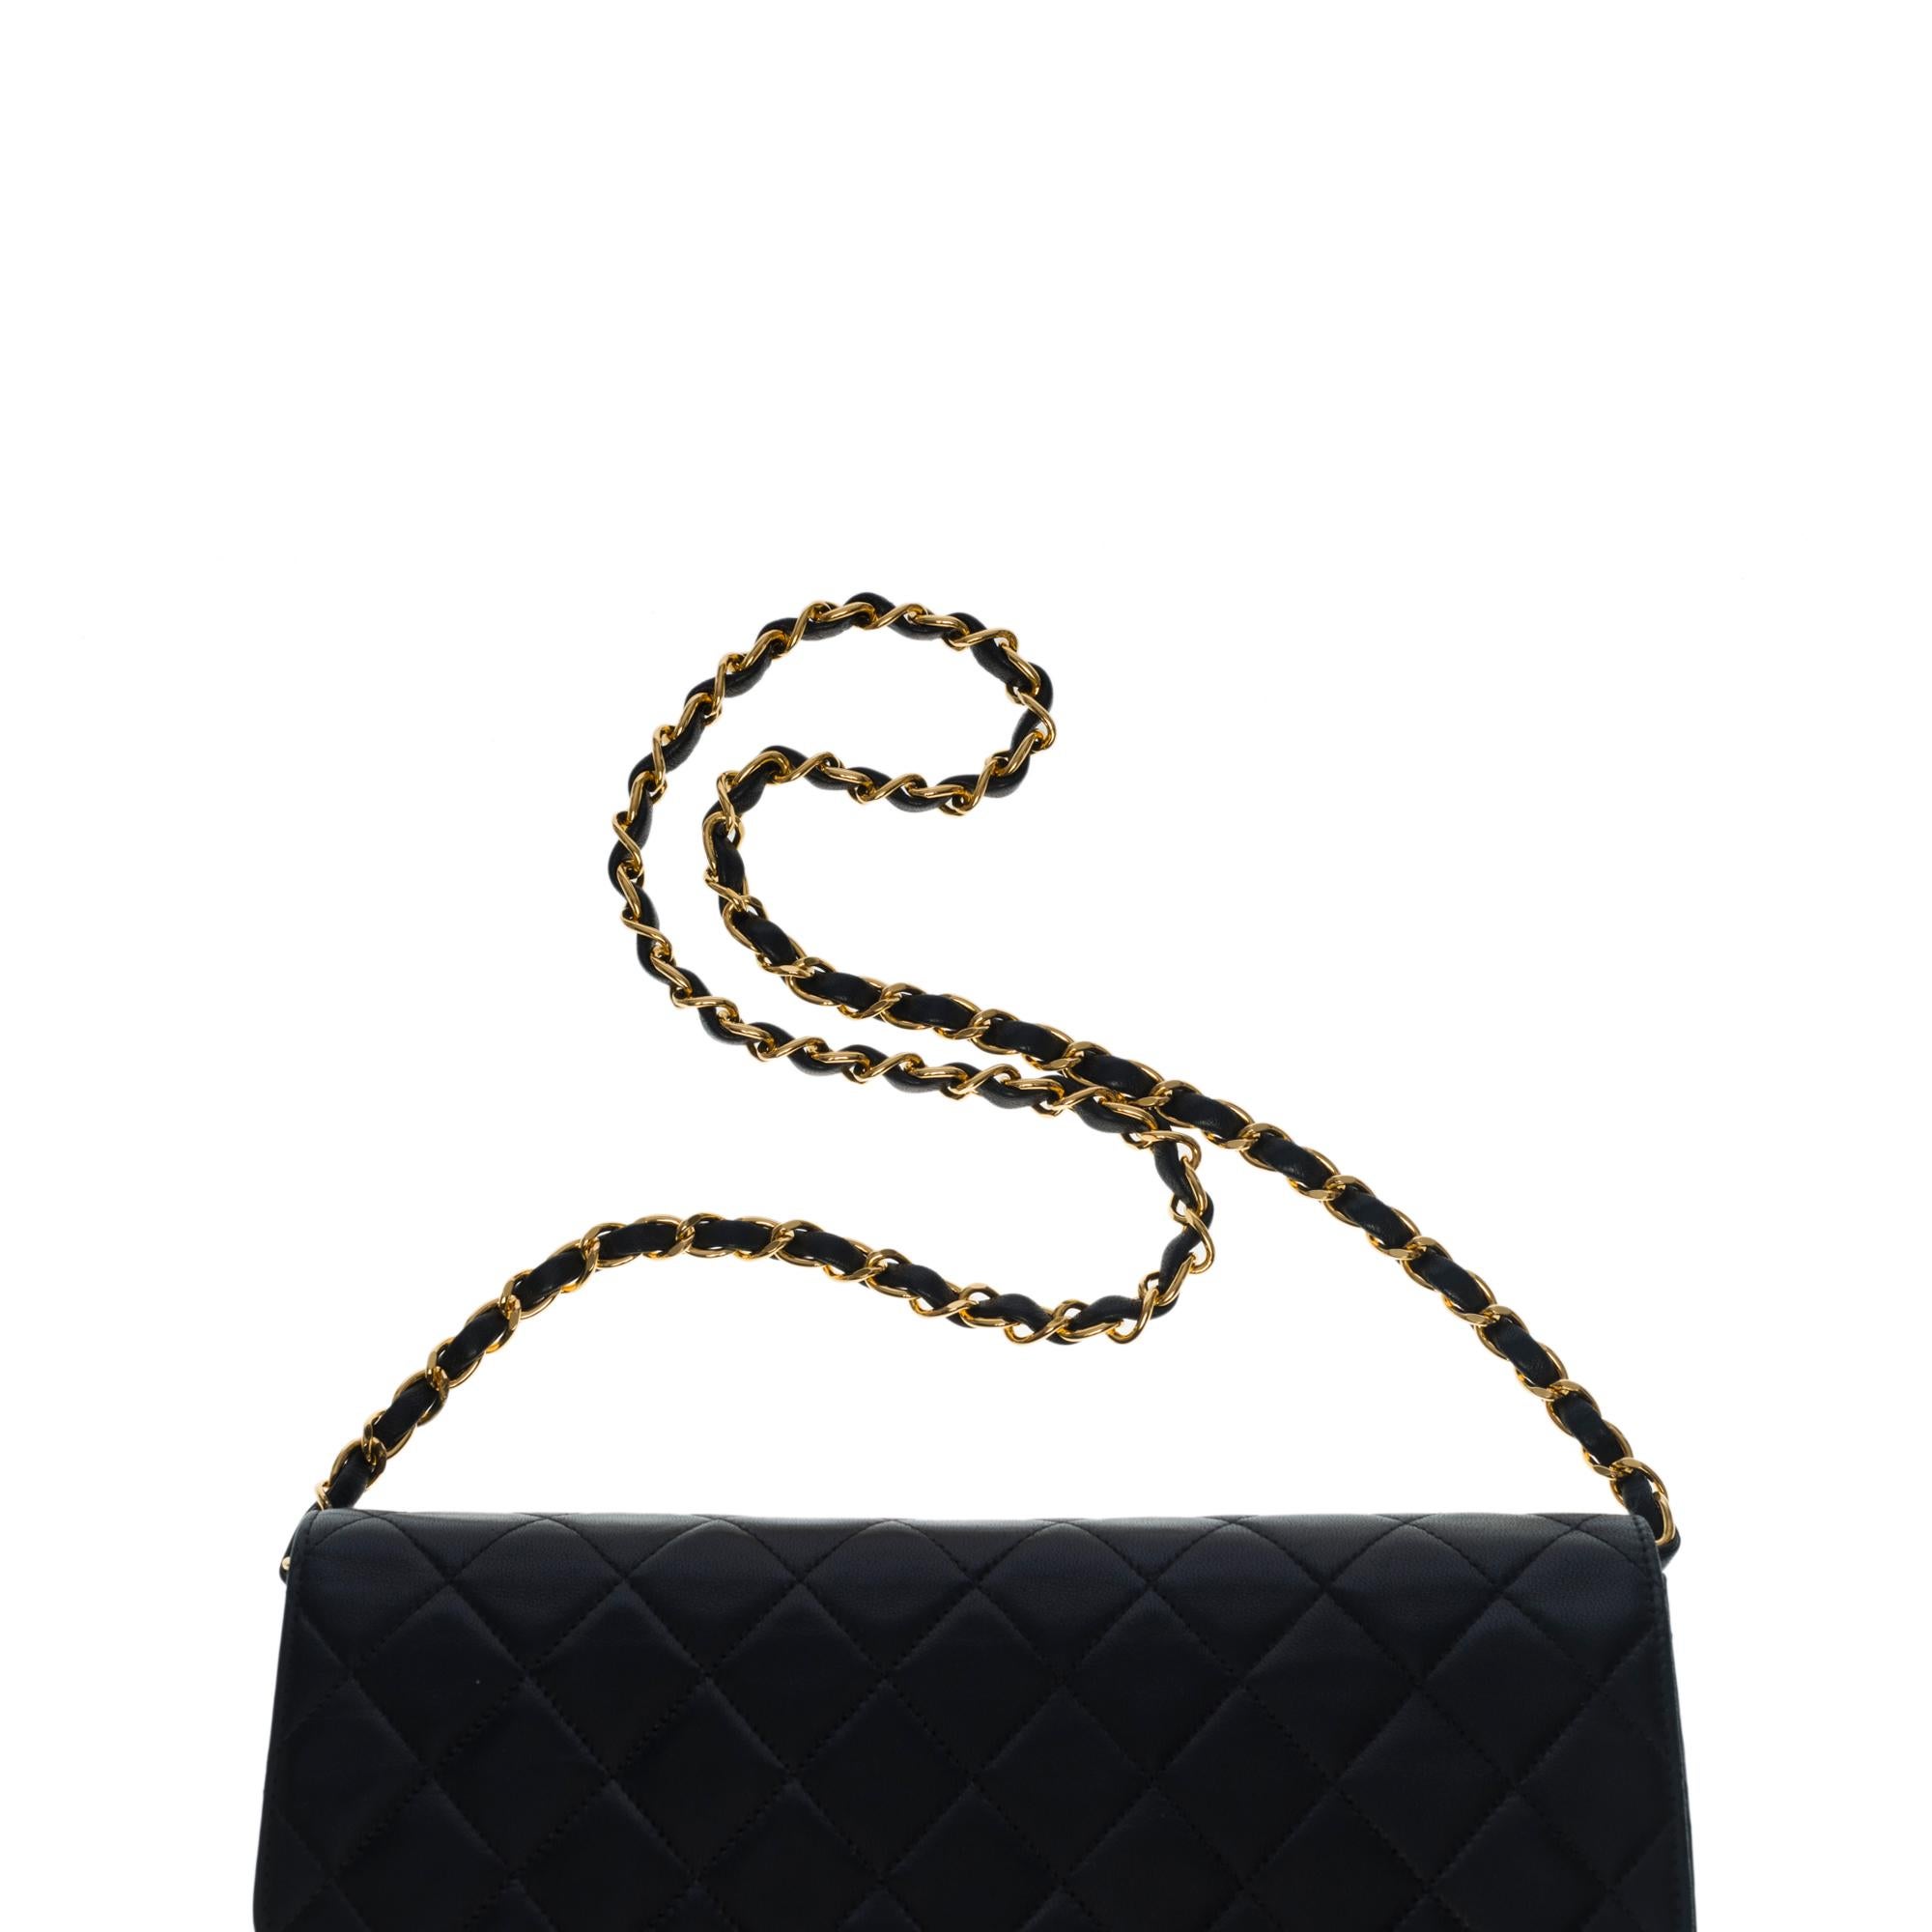 Amazing Chanel Classic shoulder flap bag in black quilted lambskin, GHW 4